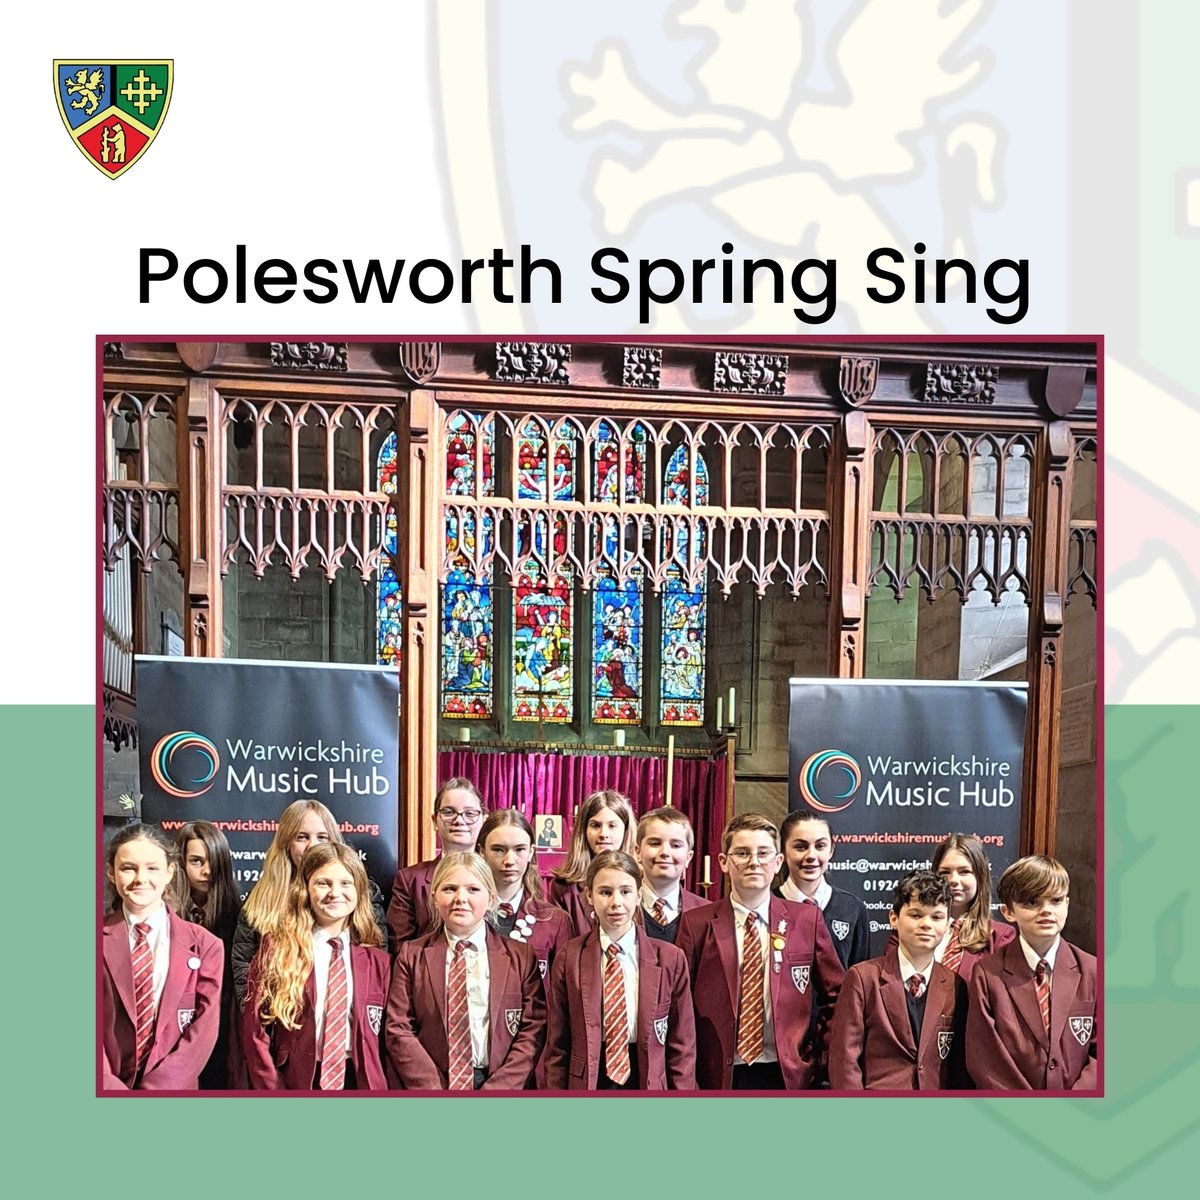 On Tuesday some of our vocal students went to Polesworth Abbey to take part in Polesworth Spring Sing which was led by the Warwickshire Music Hub. Our students worked alongside pupils from our feeder schools- Wood End, Austrey, Newton Regis and Nethersole 😊🎼 @wark_shiremusic